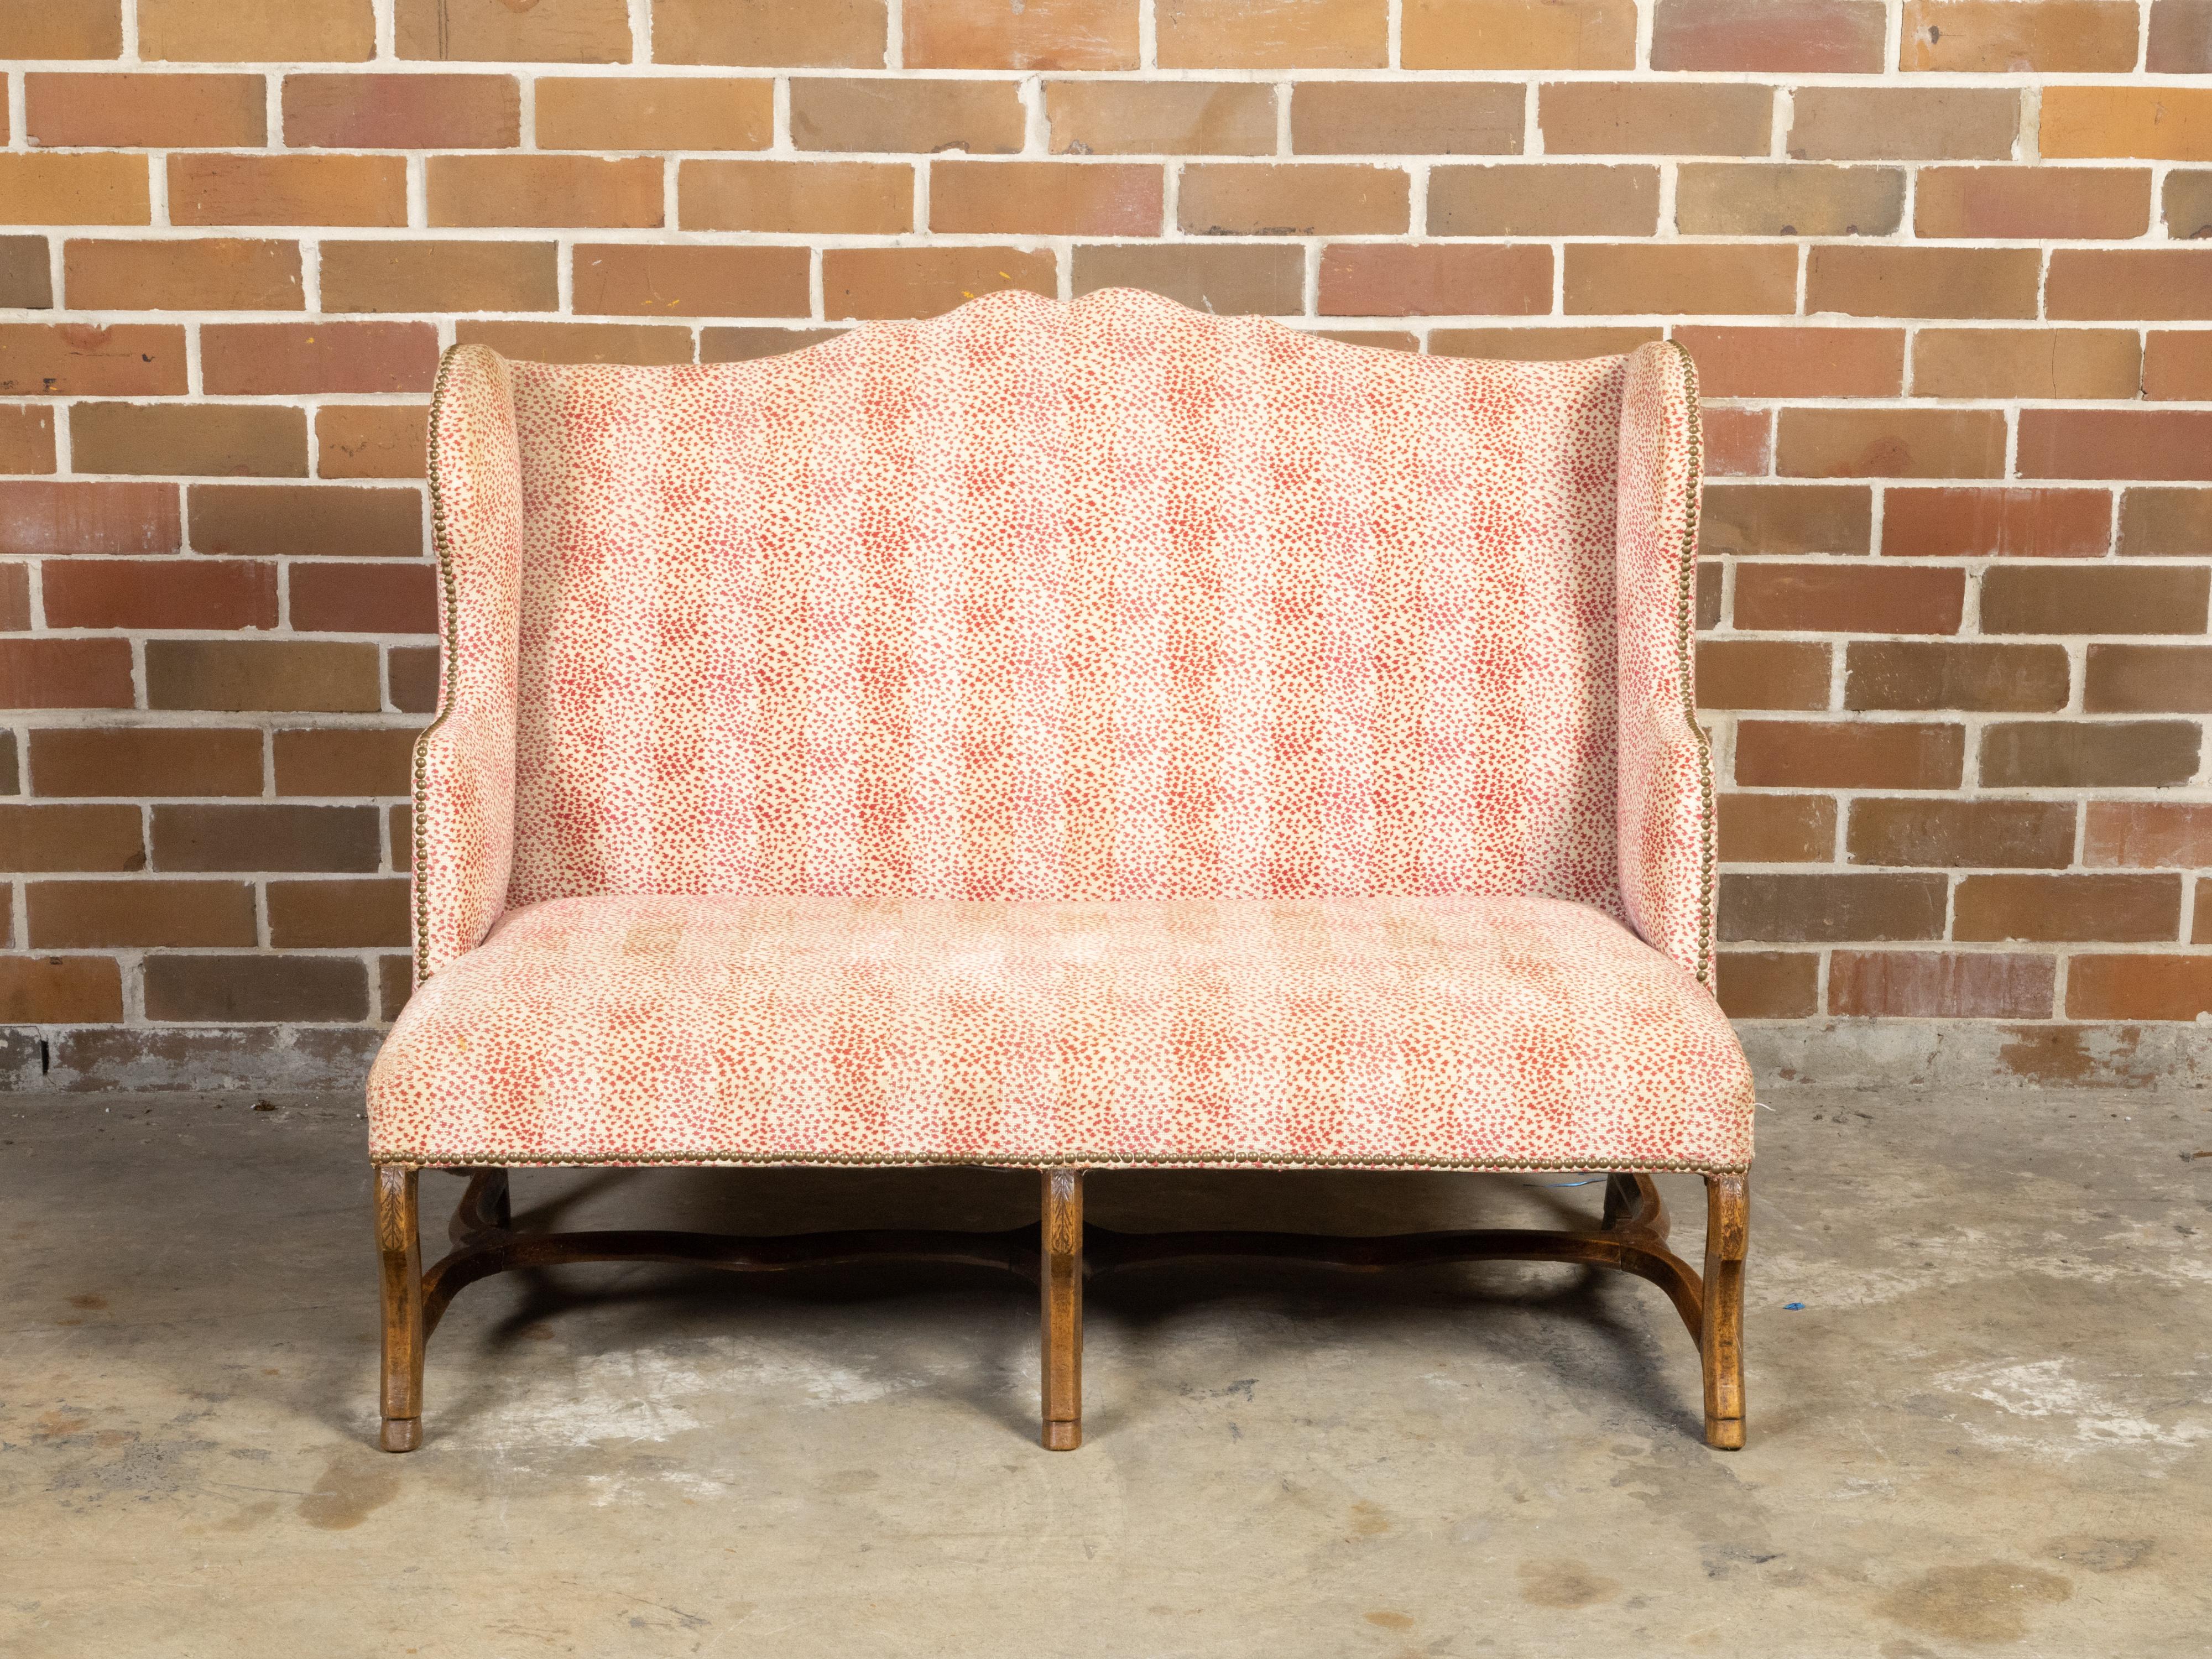 A French Régence style wingback sofa from the early 19th century, with cabriole legs, cross stretcher and red and white blotched upholstery. Created in France during the early years of the 19th century, this 